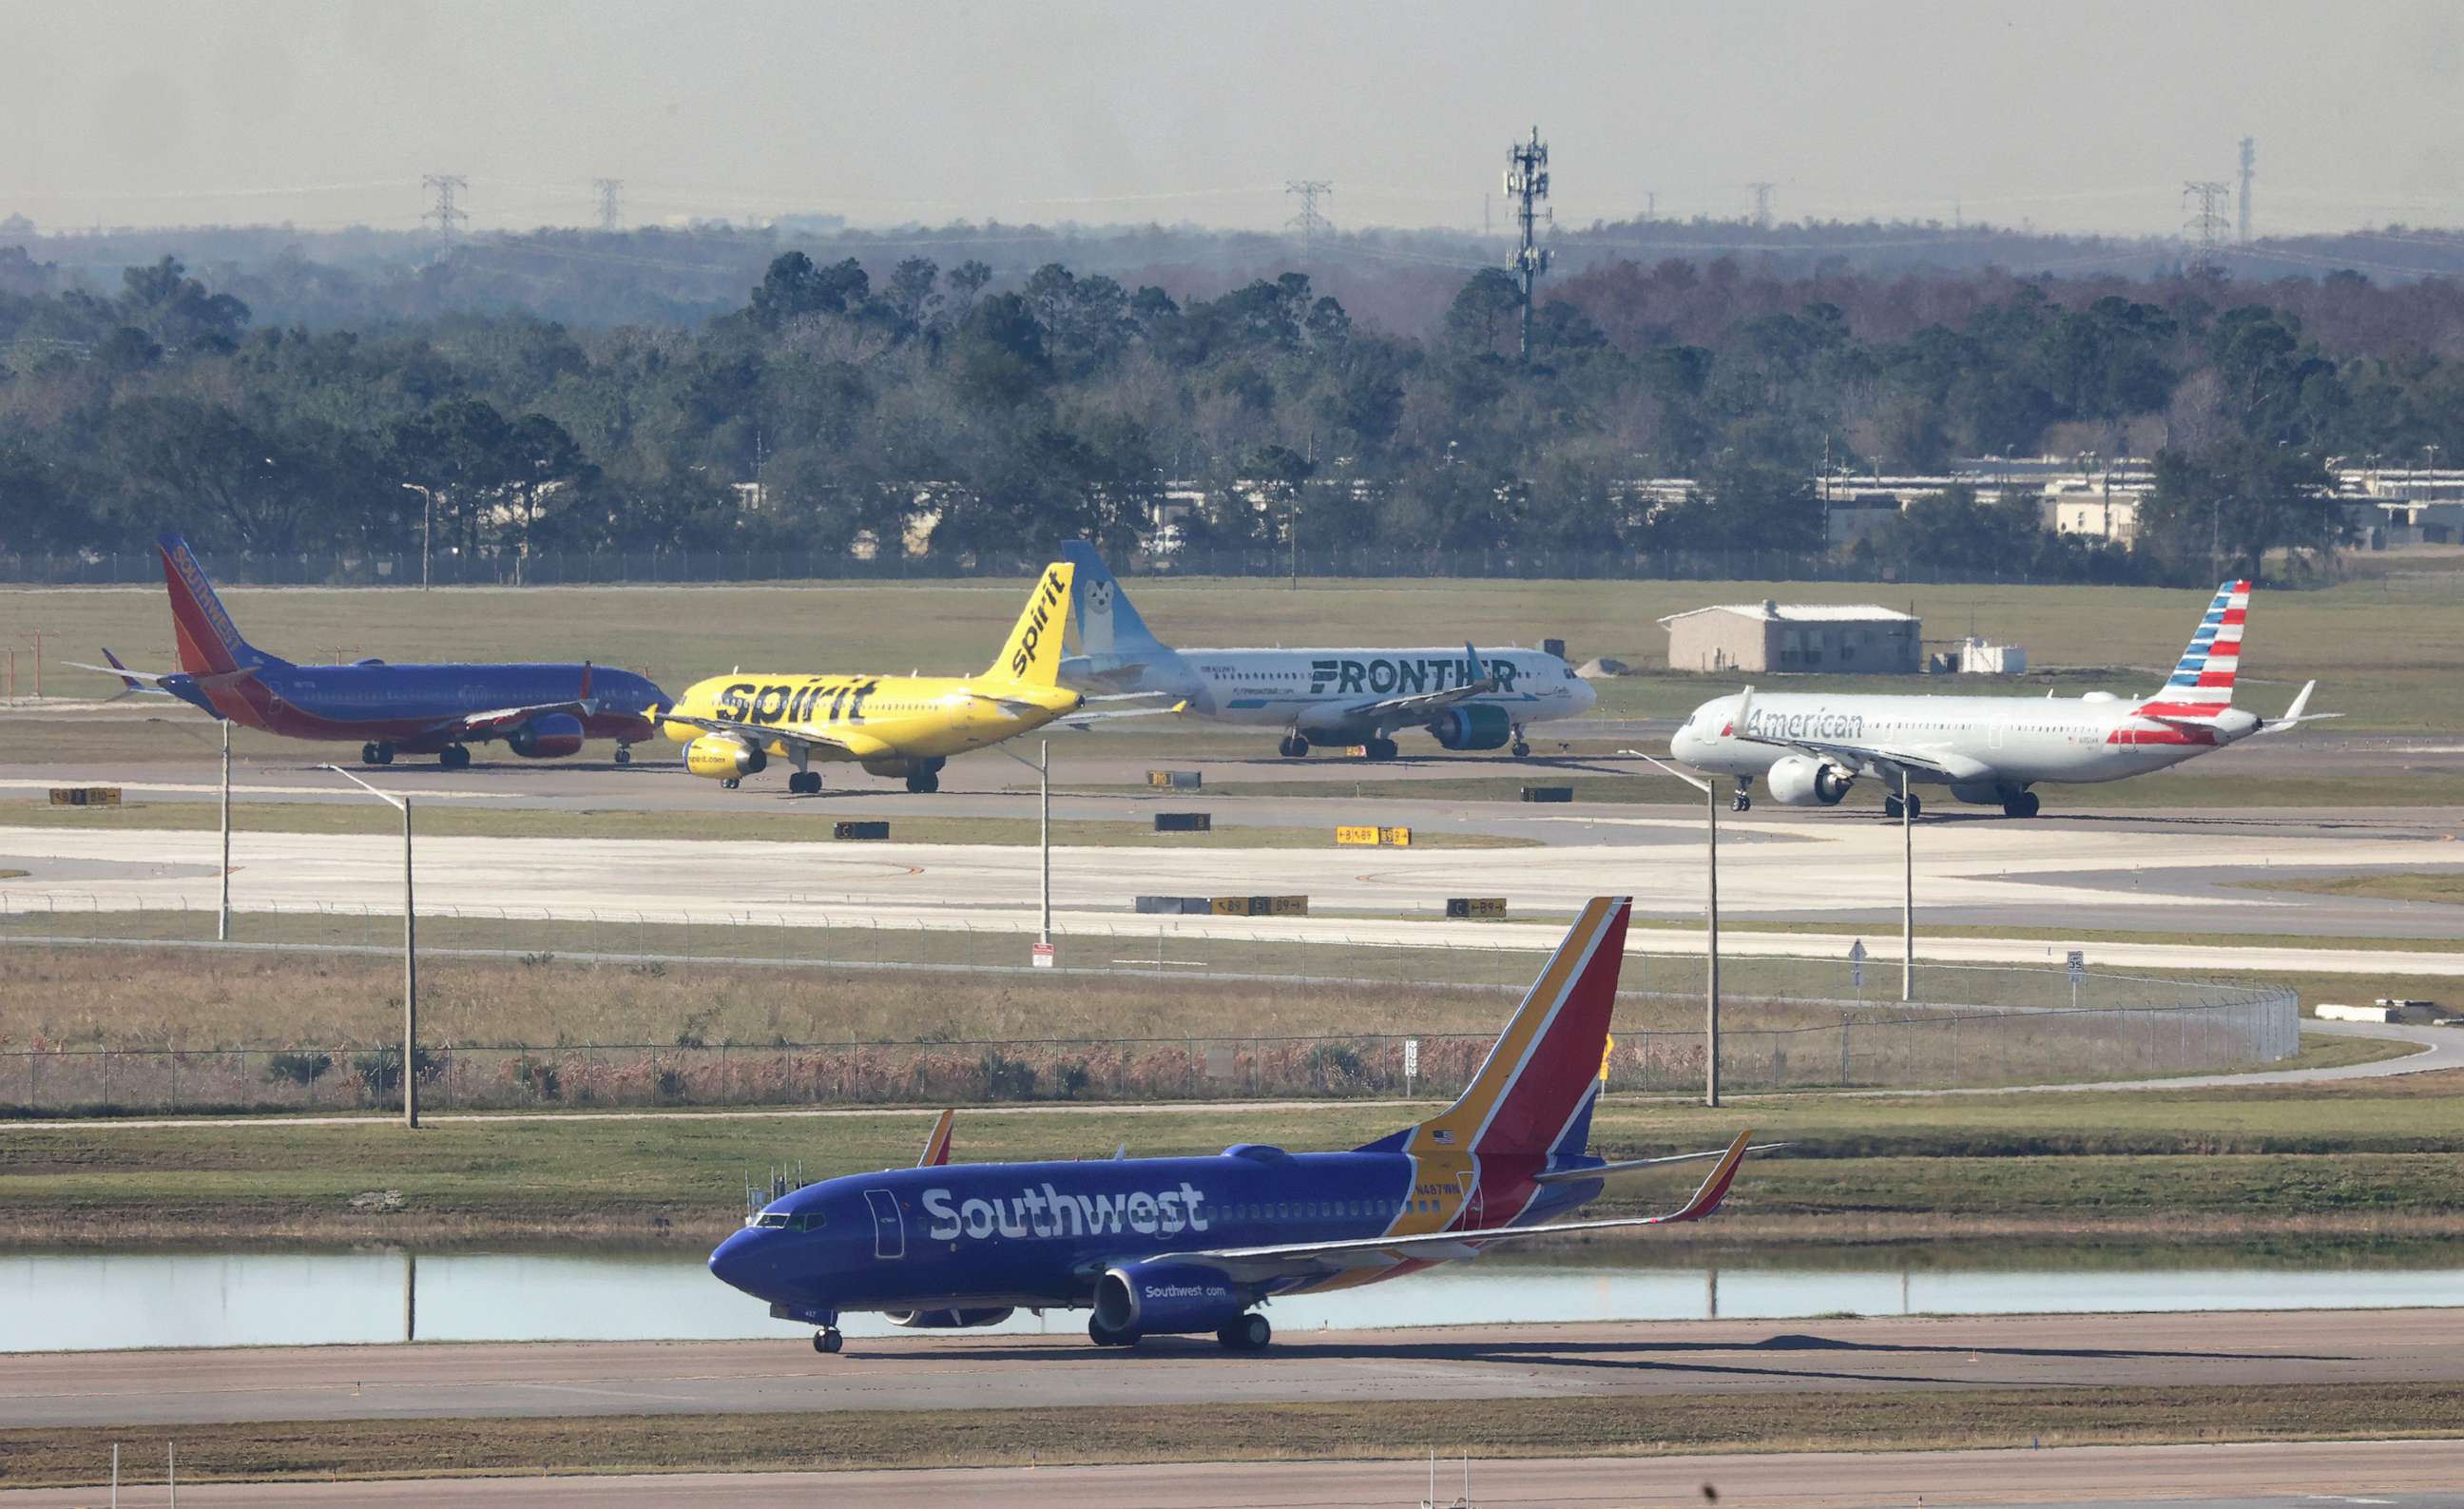 PHOTO: Airliners wait for takeoff in a queue at Orlando International Airport, Jan. 11, 2023, in Orlando, Fla.